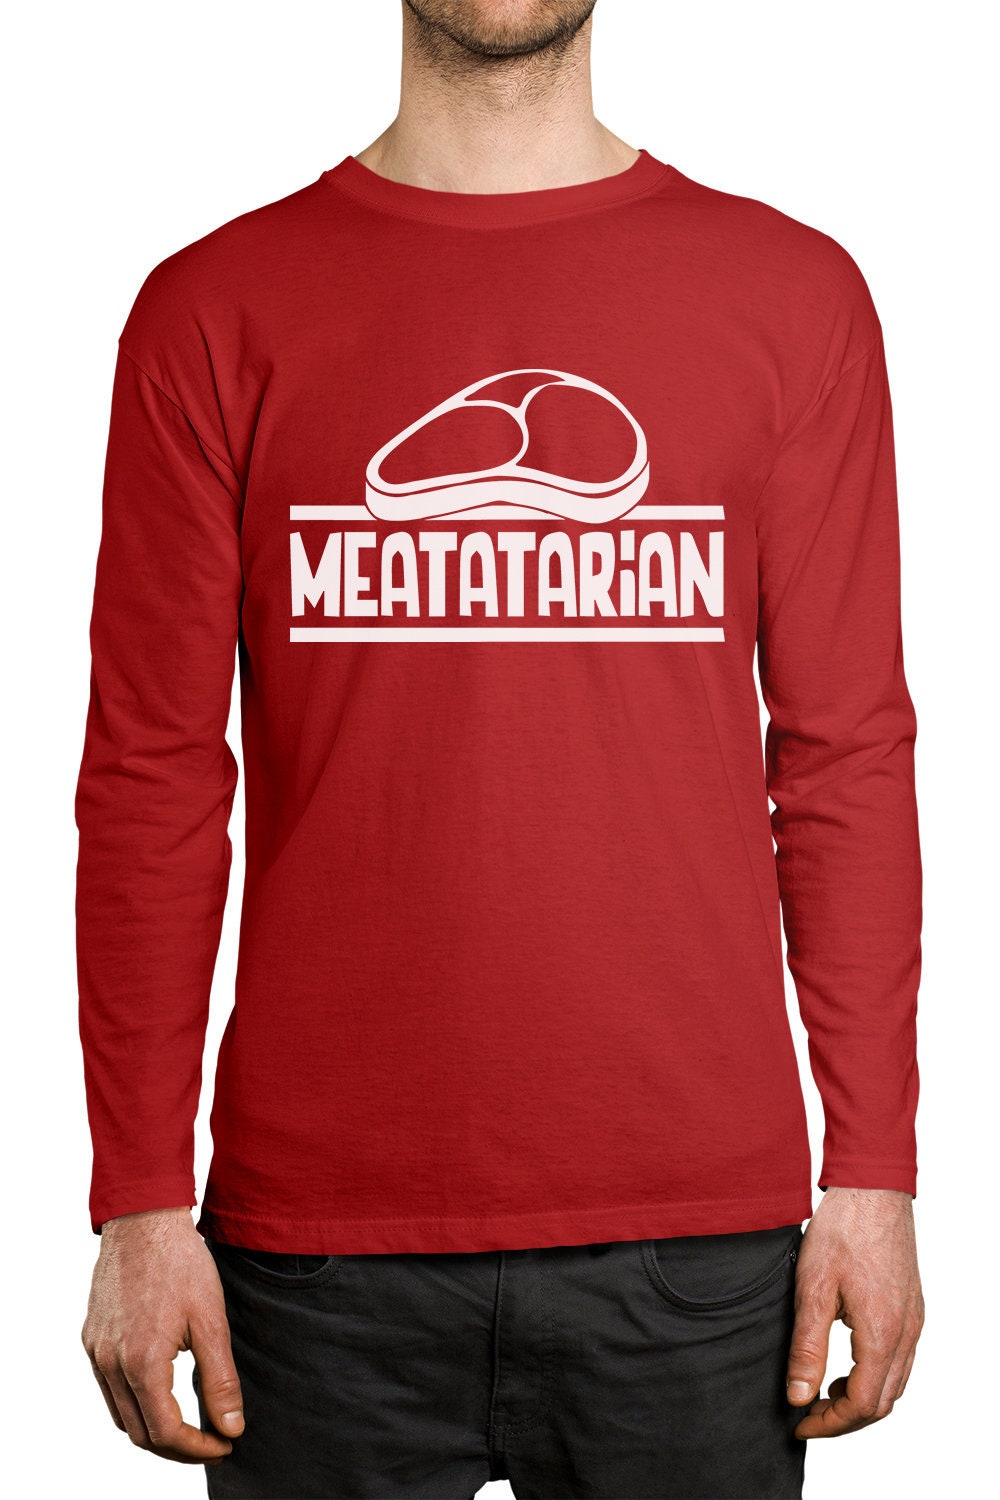 Meatatarian Carnivore Diet No-Vegans Here No Lettuce Only Animal Meat Beef Steak Poultry Seafood Fish Eating Men's Longsleeve Shirt Sf-0412